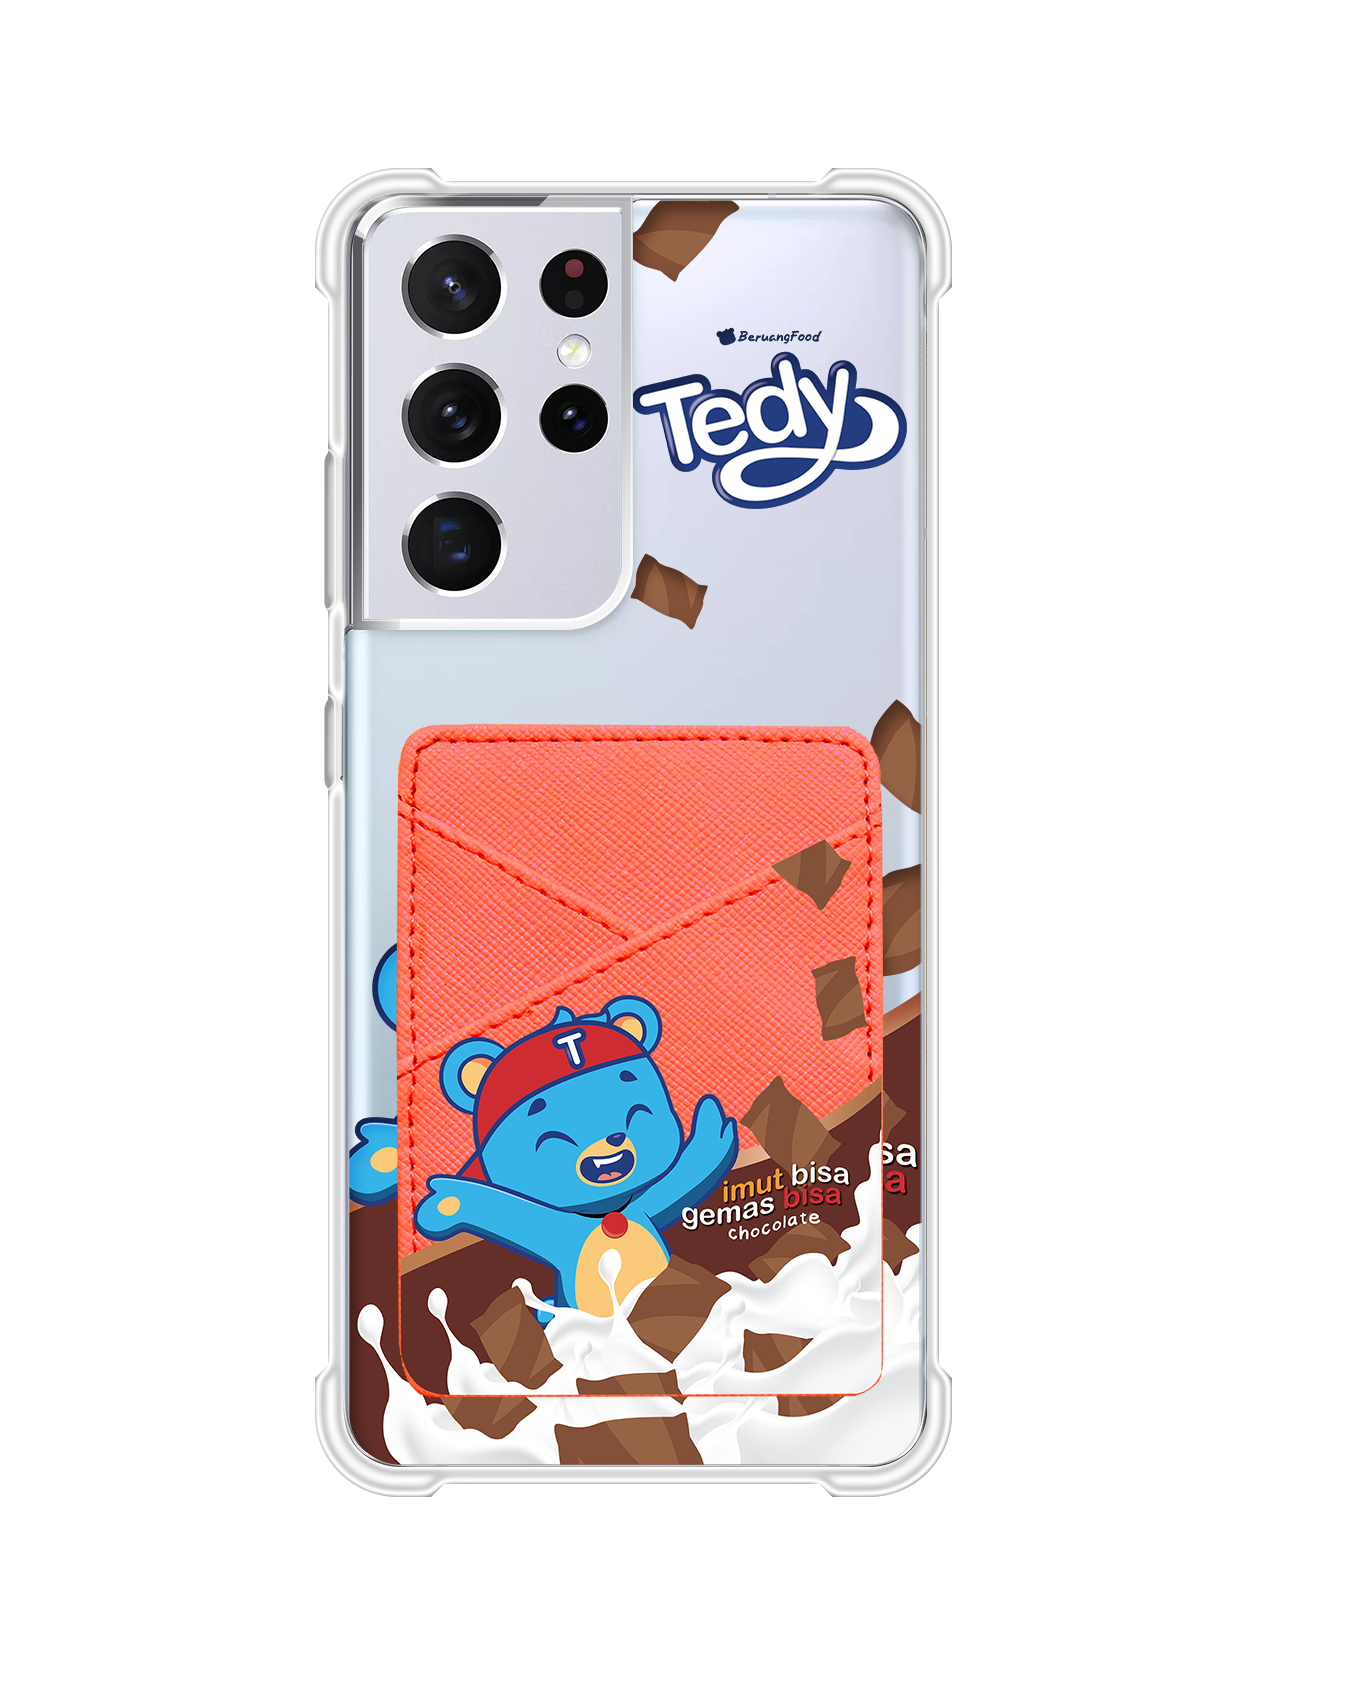 Android Phone Wallet Case - Tedy